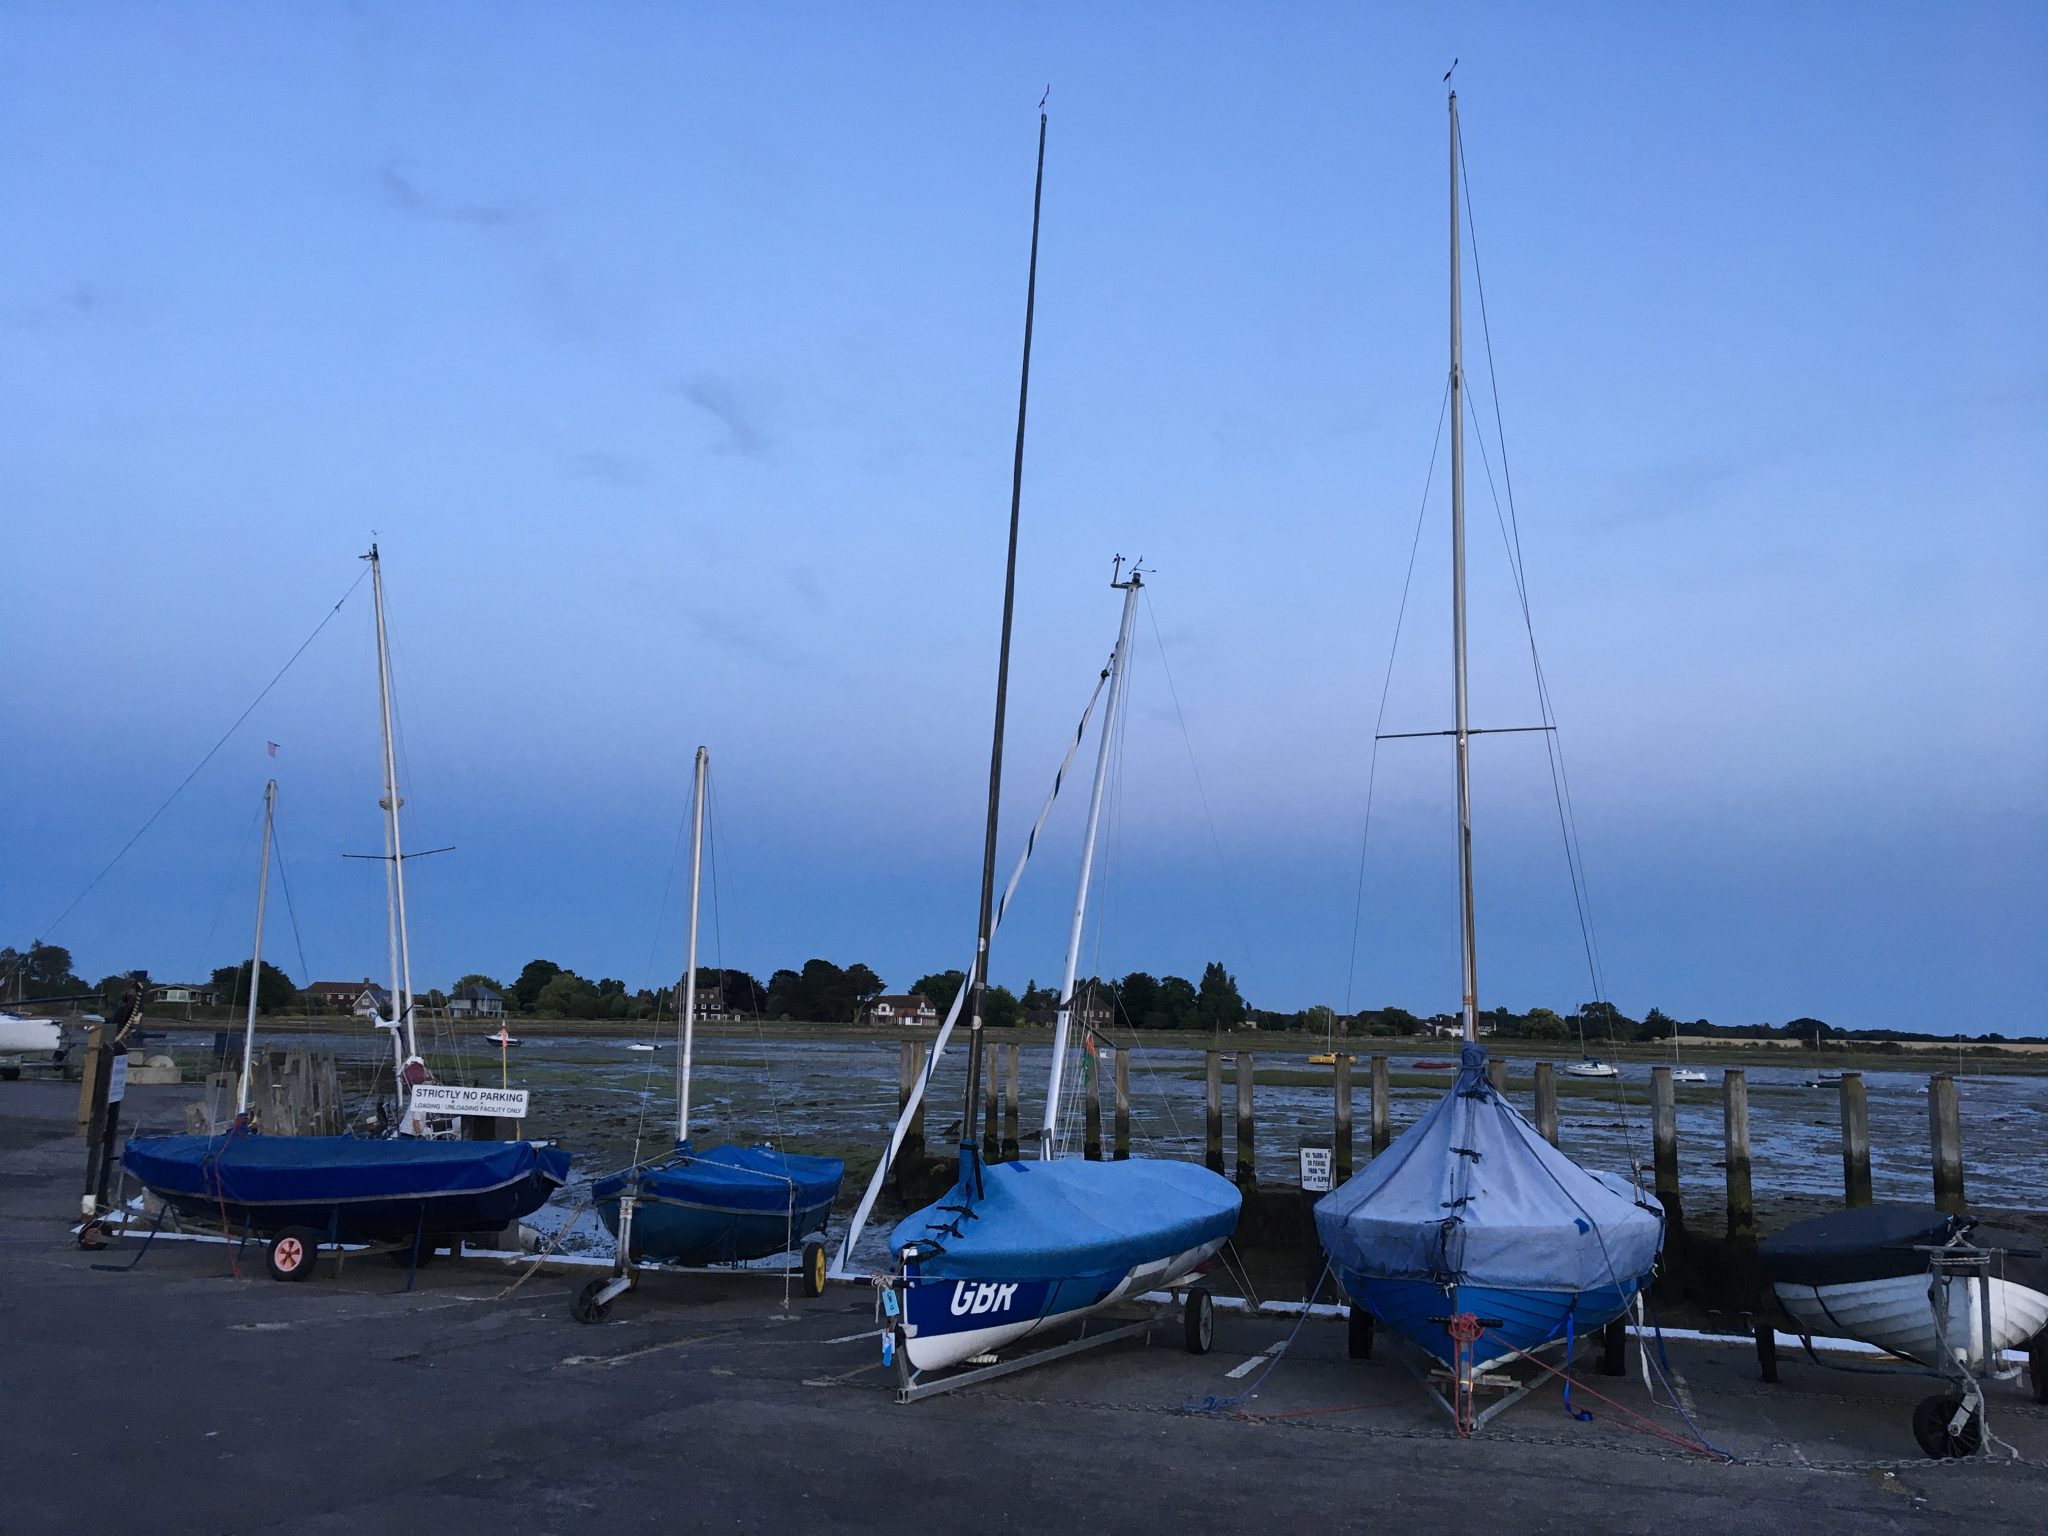 Sailing boats "resting" on dry land after a day in the water.